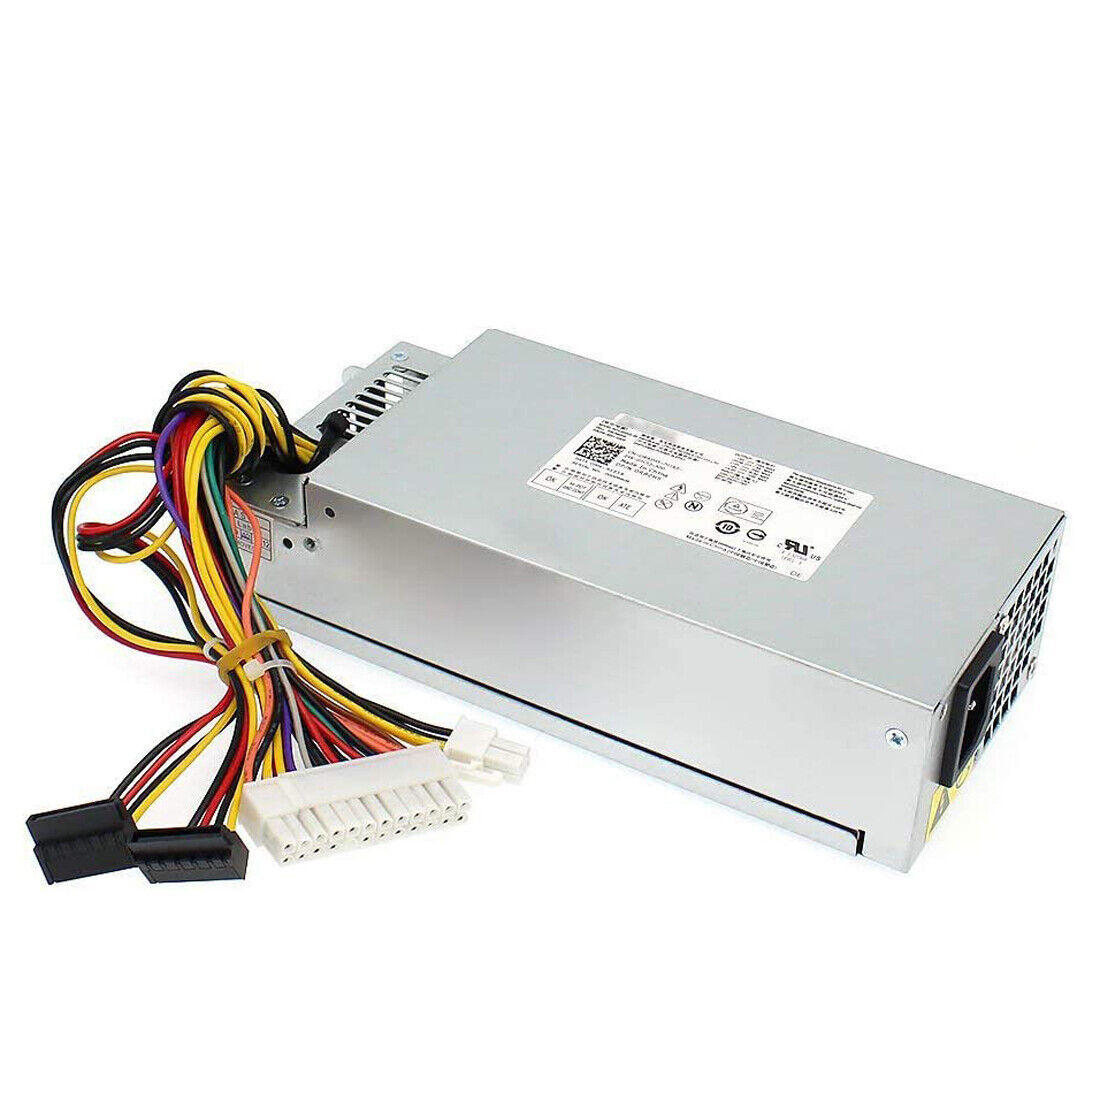 1X PSU POWER SUPPLY 220W FOR LITEON PS-5221-06 CPB09-D220R PS-5221-9 DPS-220UB-A